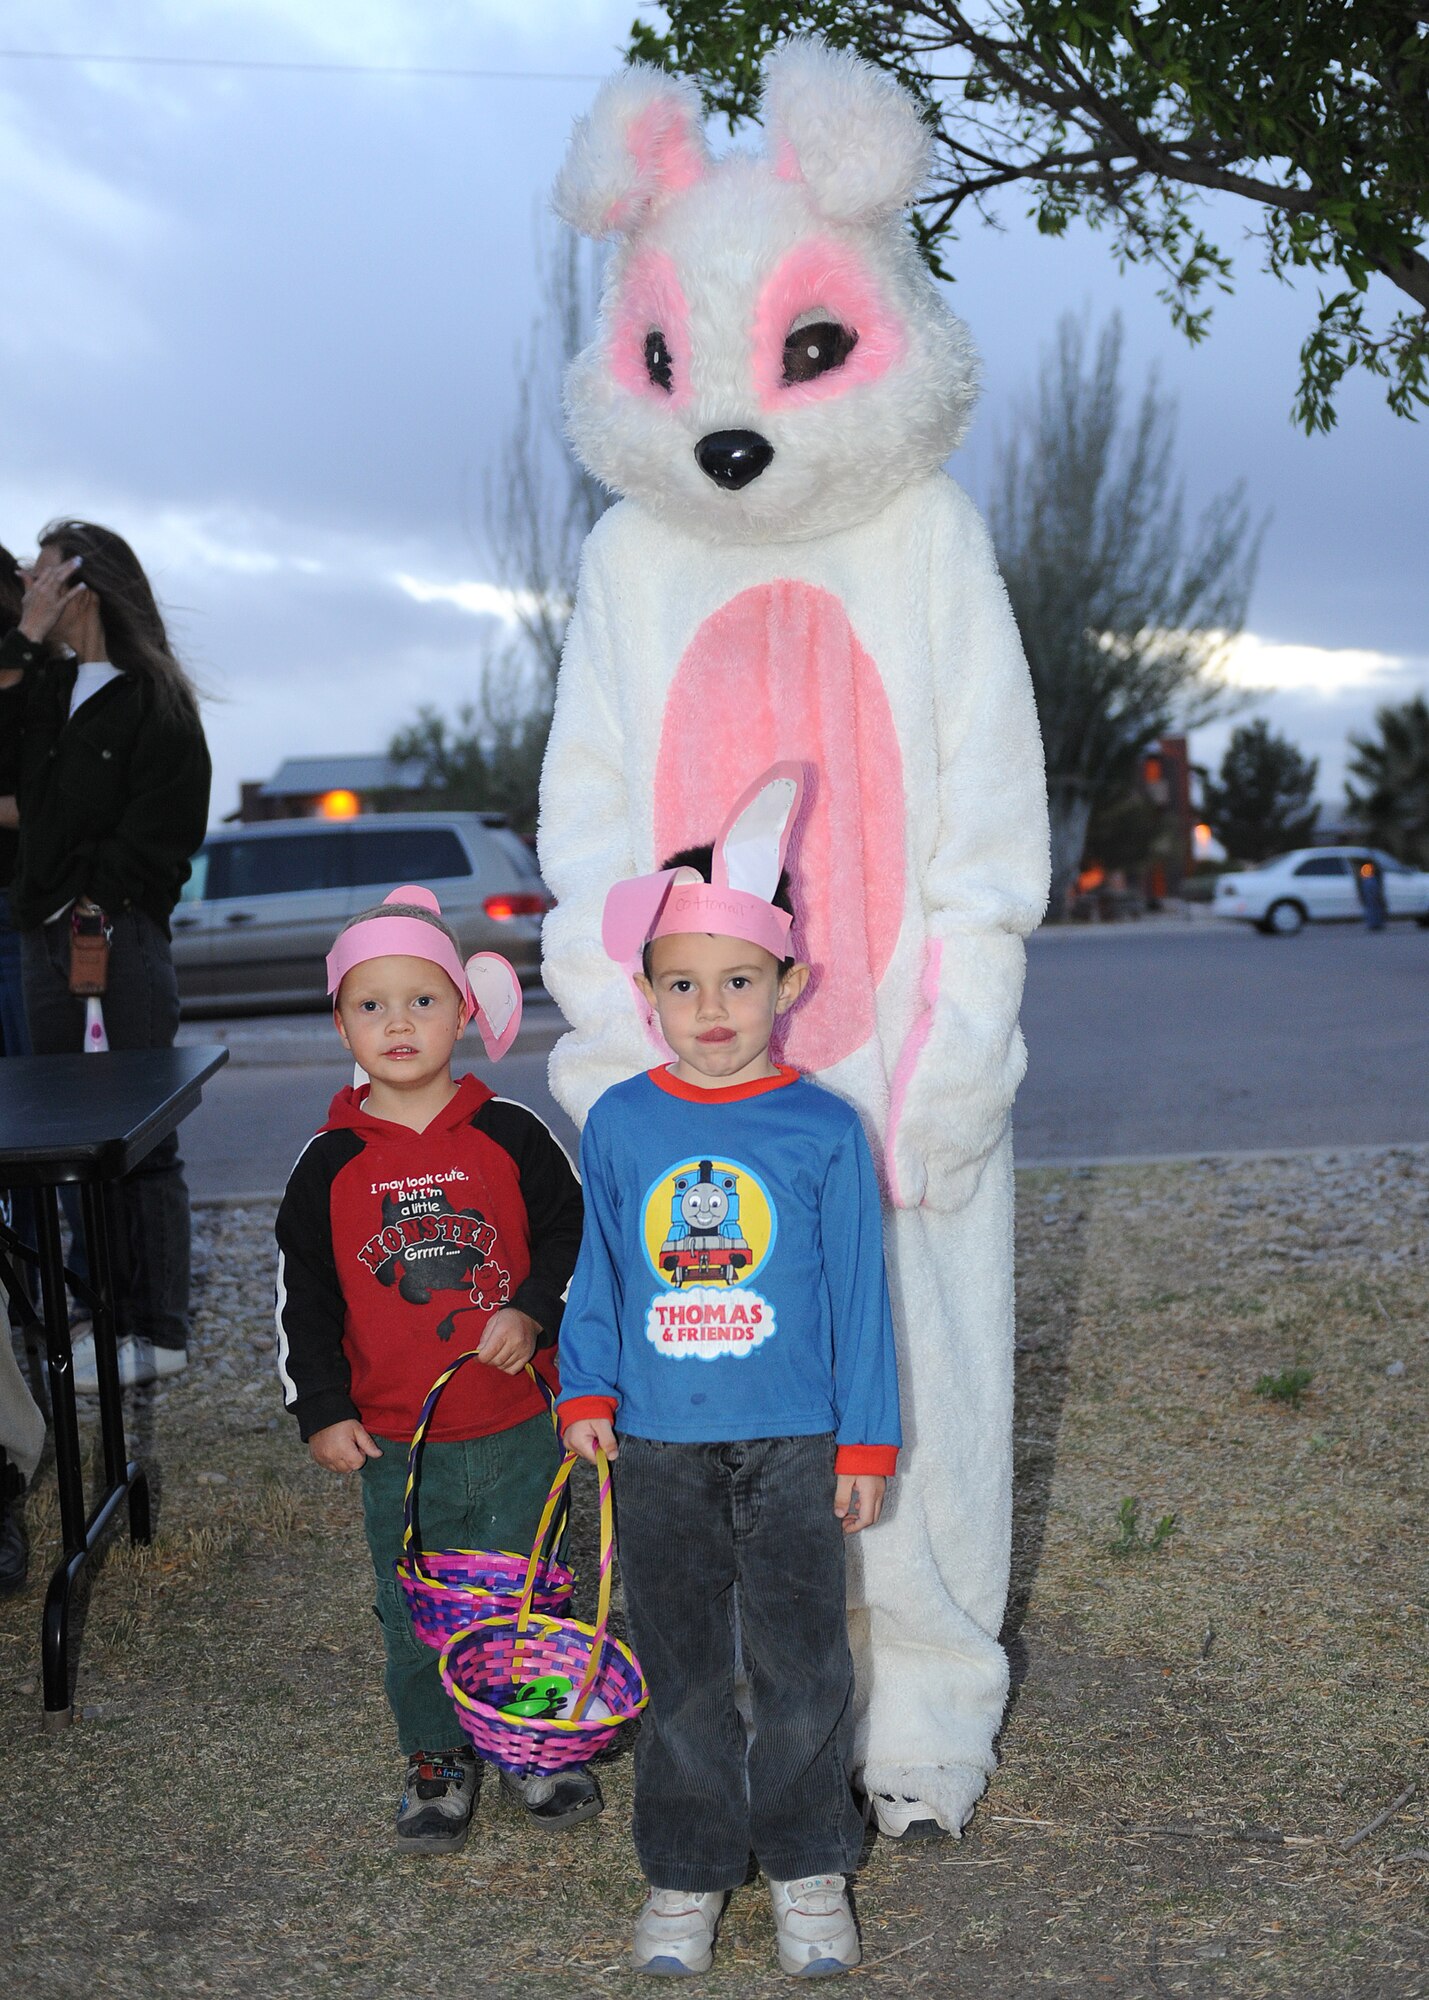 David and Alex Westfall, sons of Chap. (Capt.) Olga Westfall, 49th Fighter Wing, stand by the Easter bunny at Steinhoff Park after the Easter Egg Hunt on Holloman AFB, N.M., April 10. Over 1500 easter eggs were hidden throughout Steinhoff park for the hunt. (U.S. Air Force photo/Senior Airman Michael Means)